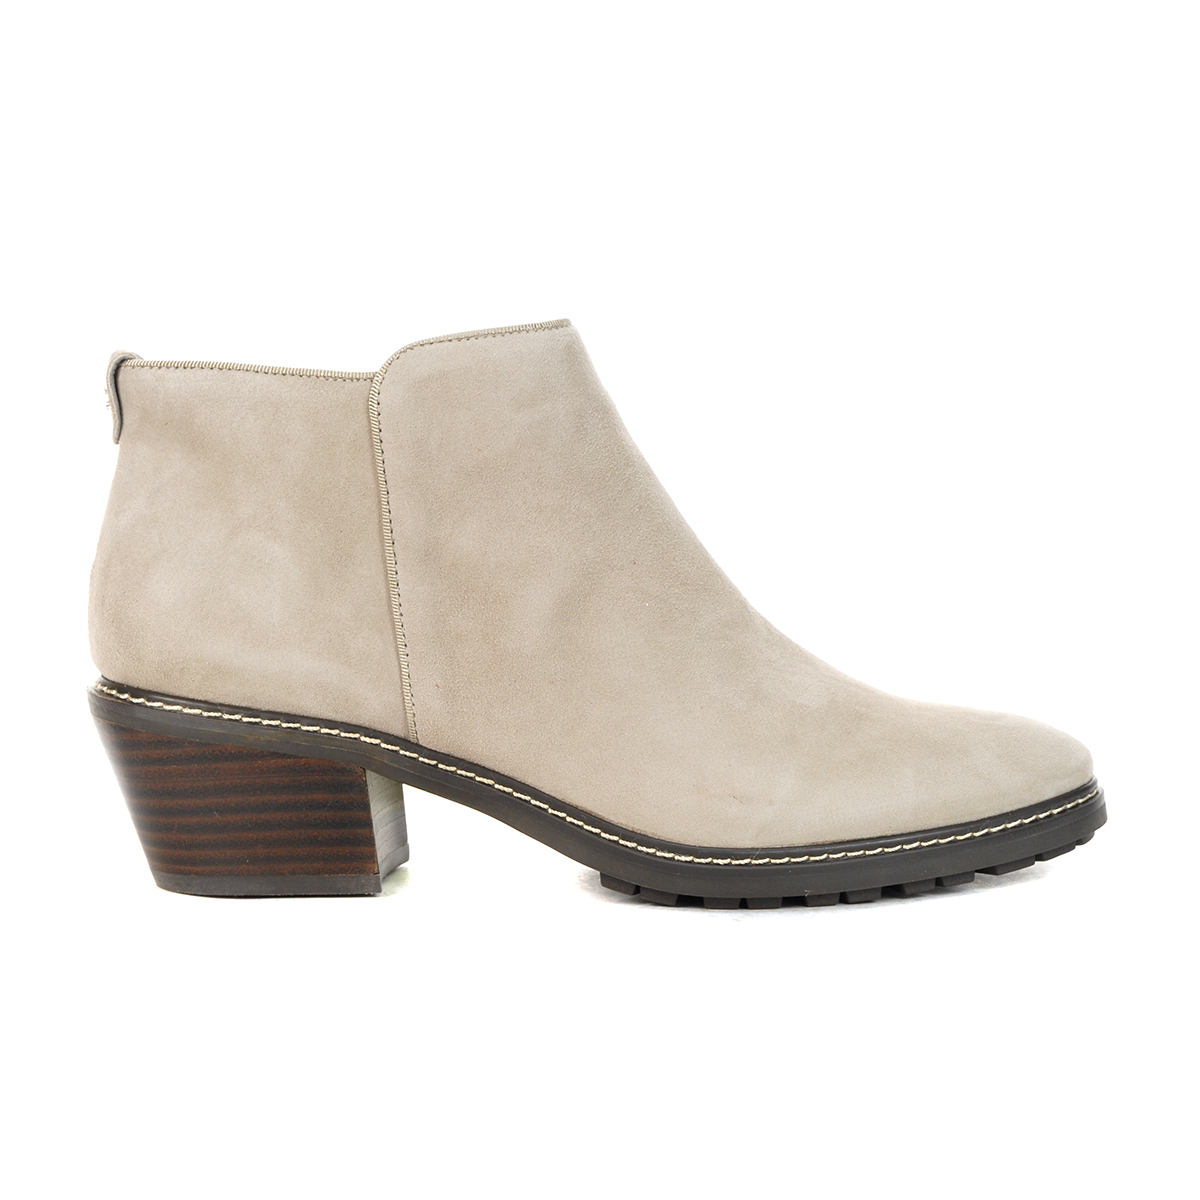 Sam Edelman Pryce Putty Suede Ankle Booties